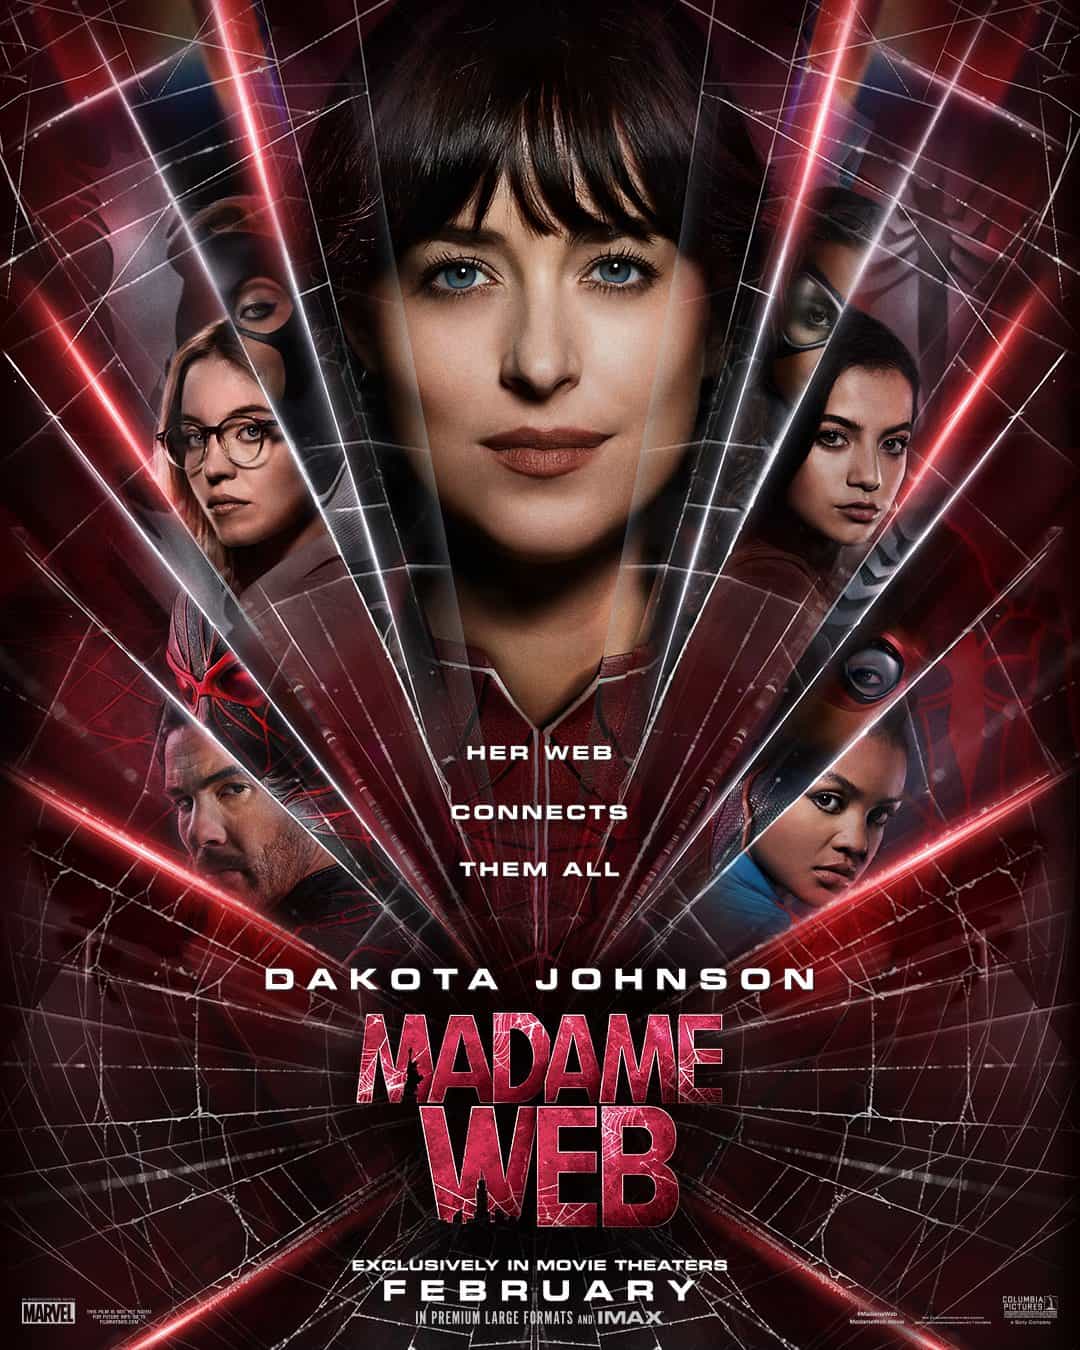 Madame Web is given a 12A age rating in the UK for moderate violence, threat, language, brief bloody images